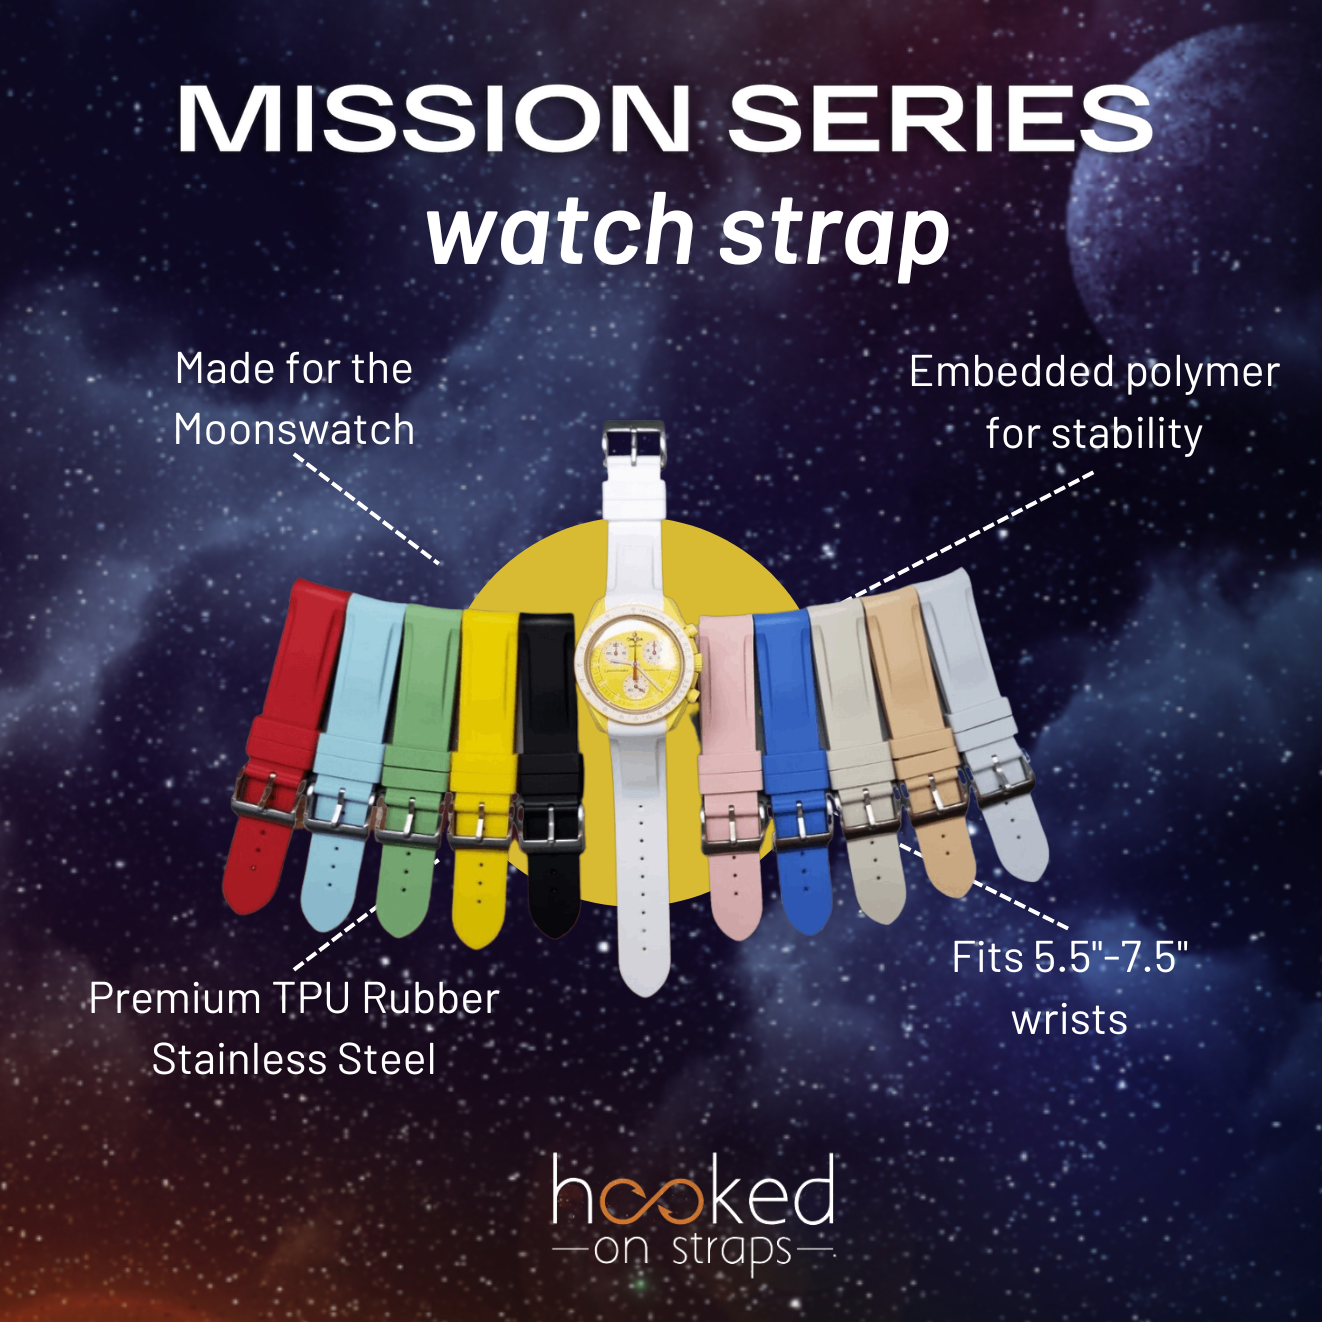 features of omega moonswatch curved rubber strap - mission series